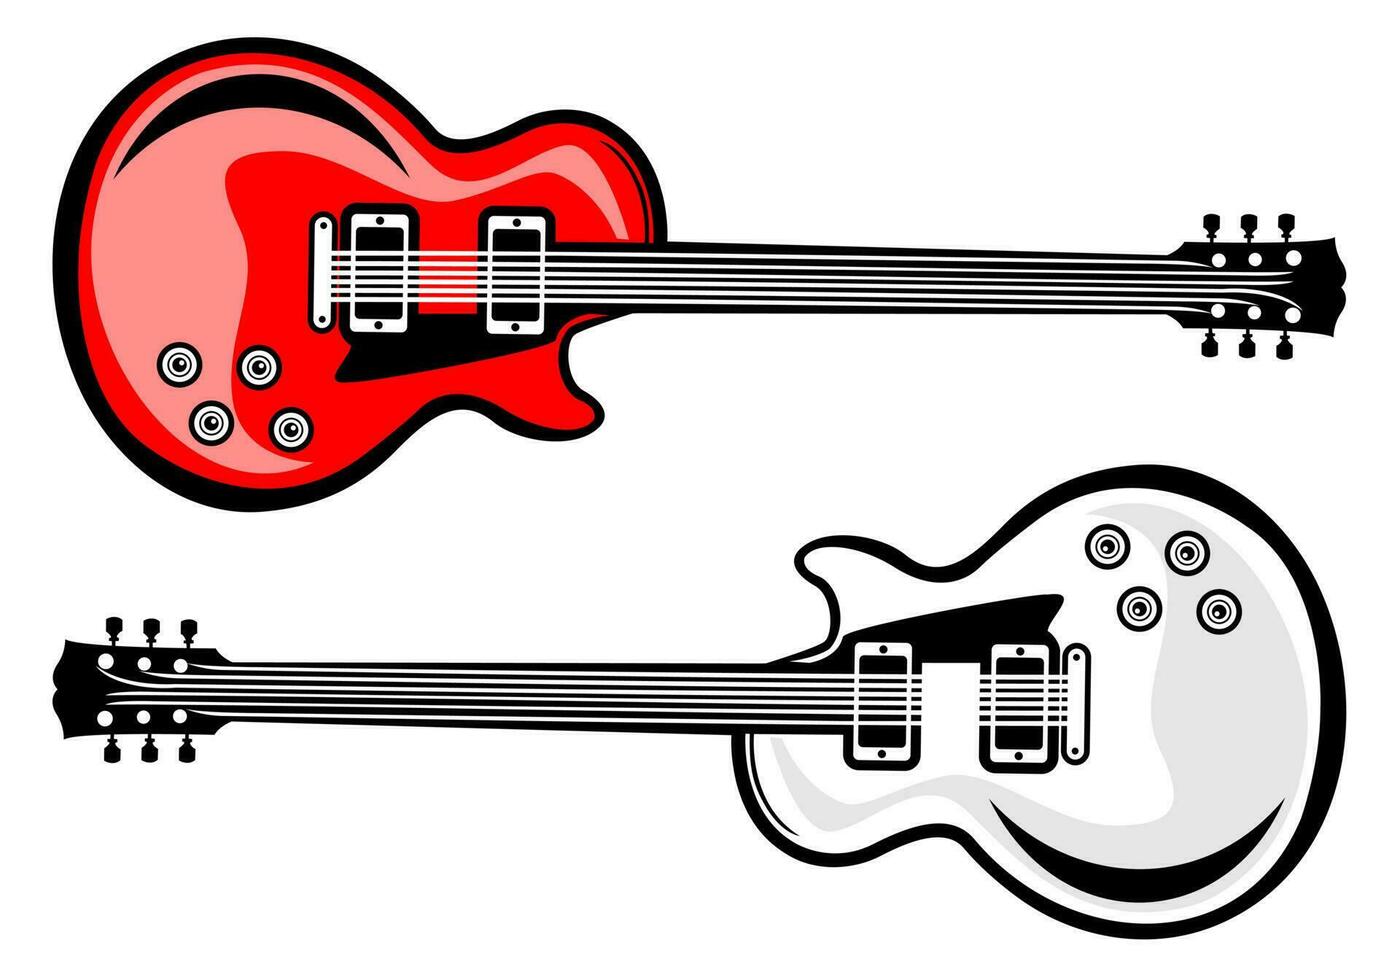 Electric guitar illustration template vector